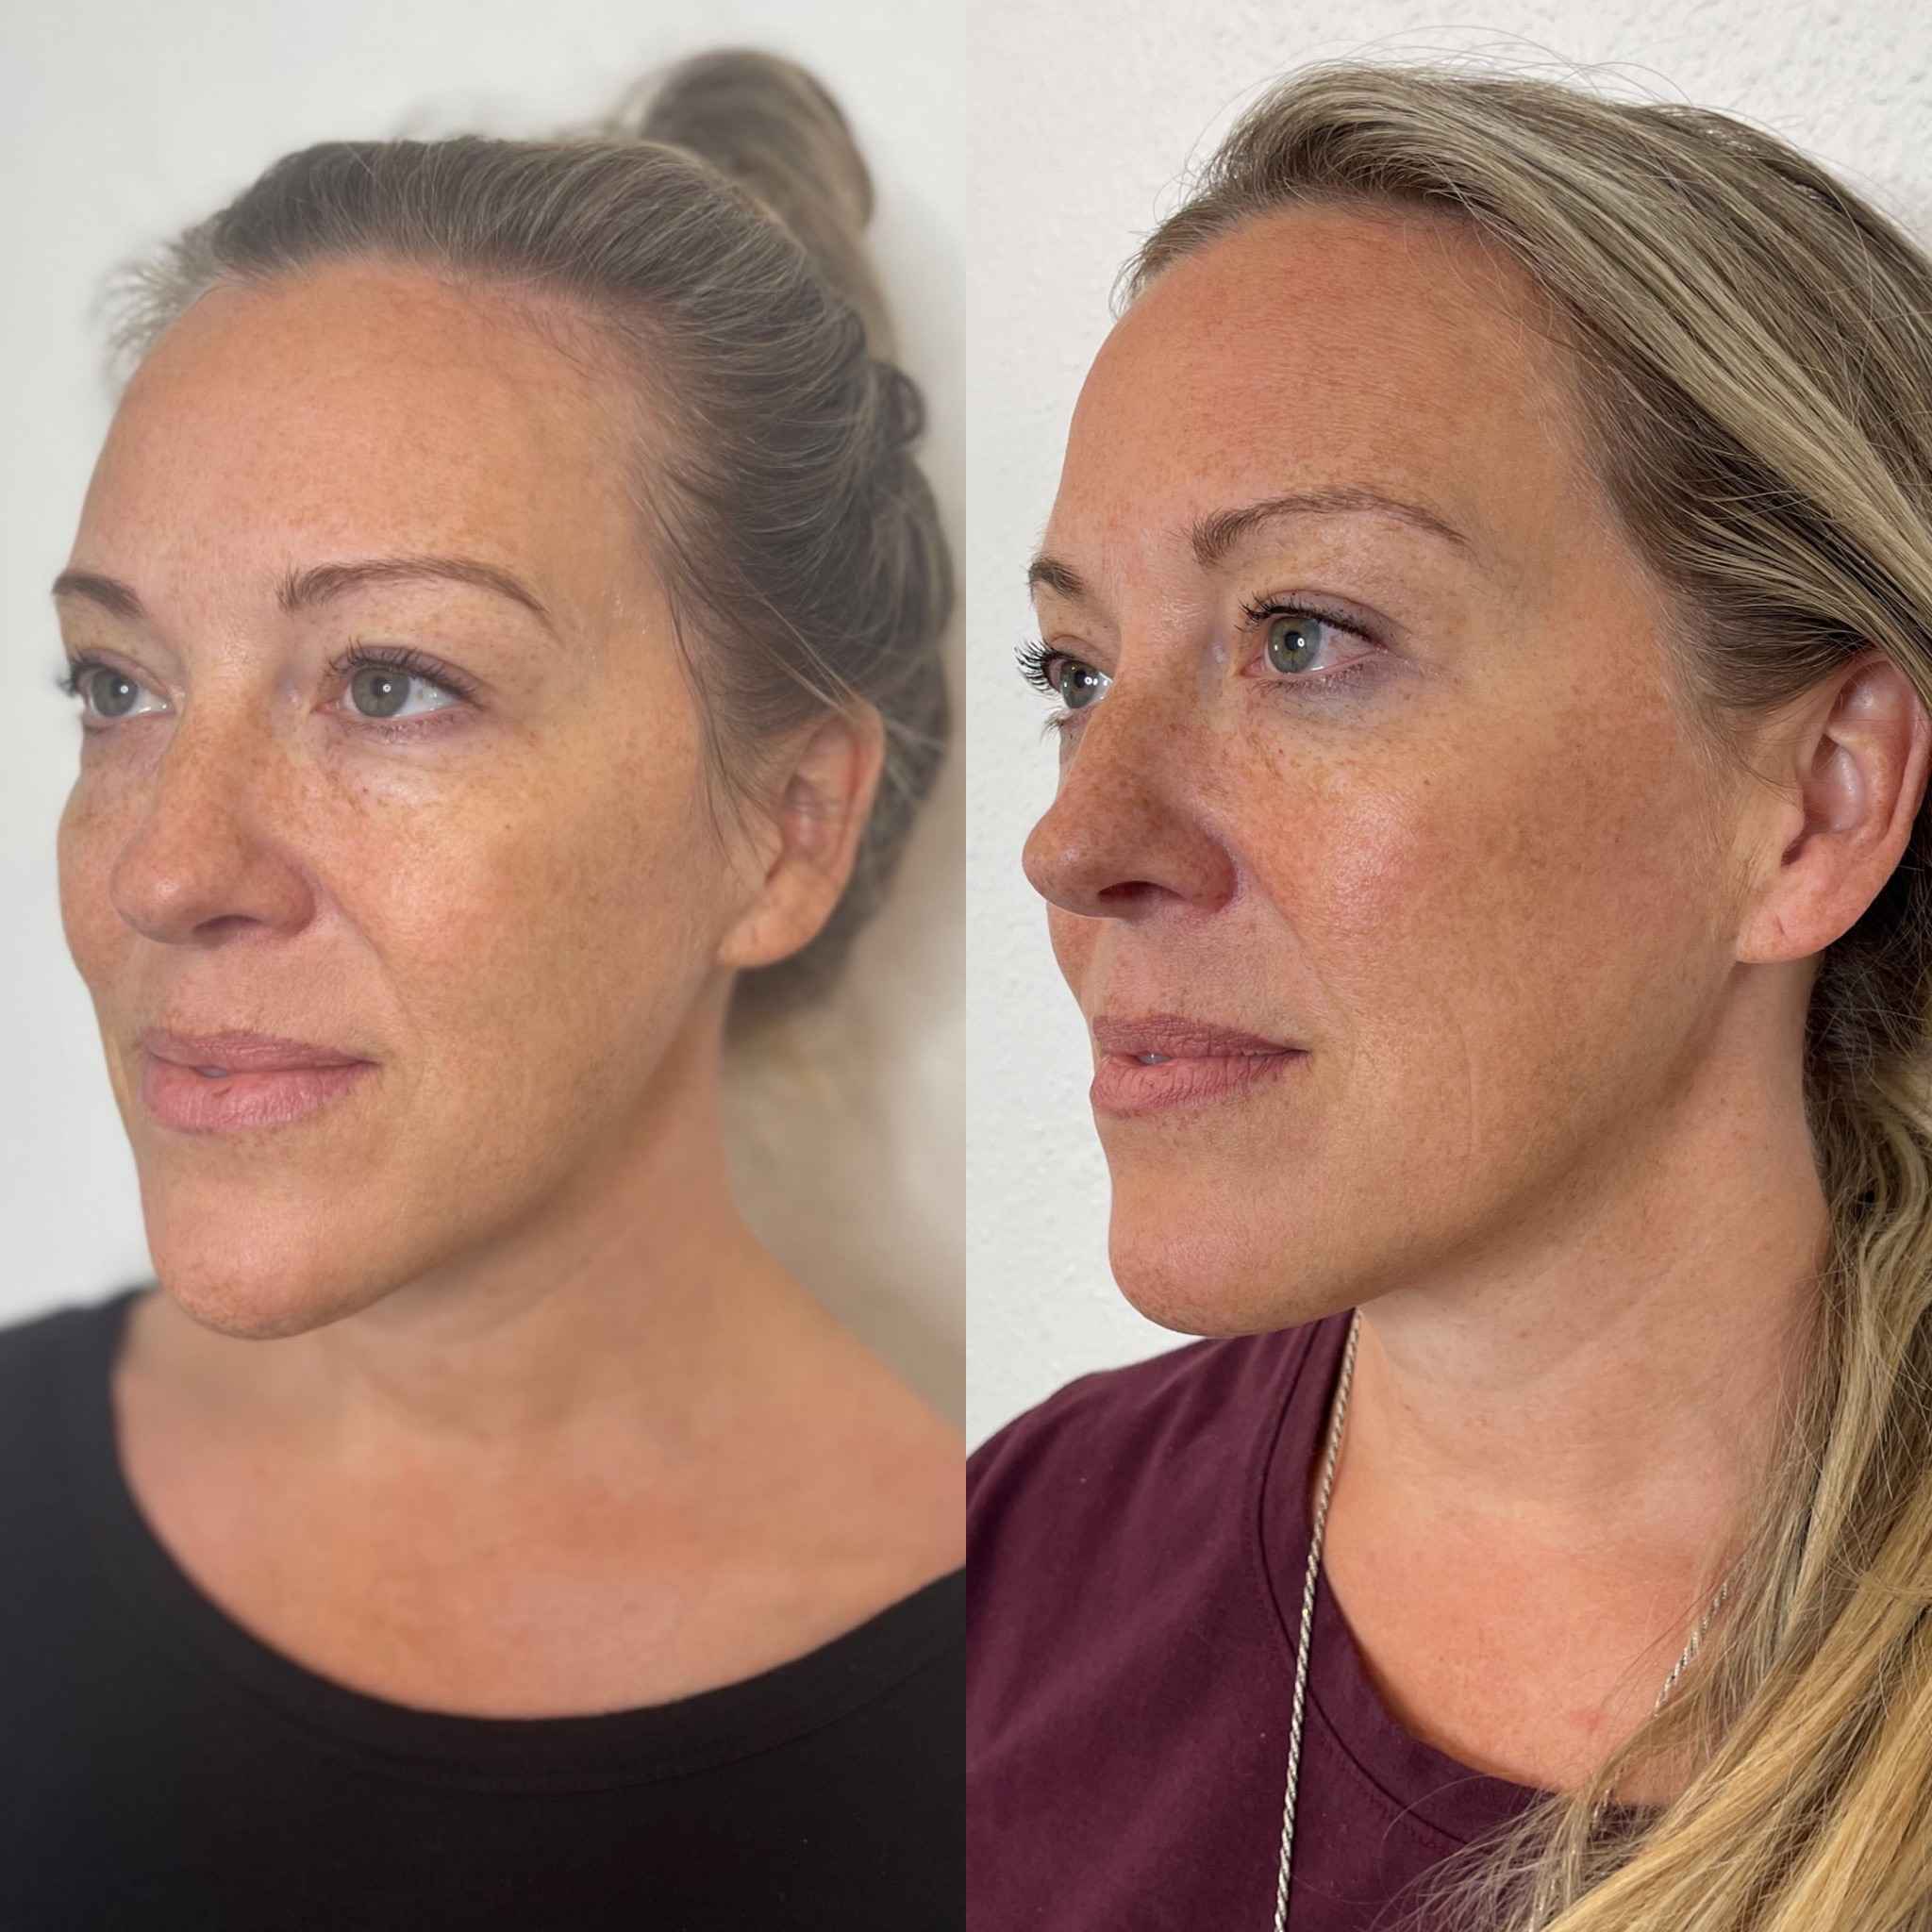 Before and After Changes in Face After Bio Stimulator Treatment | Onyx Medical Aesthetics | Homann Dr. S.E. suite B Lacey, WA